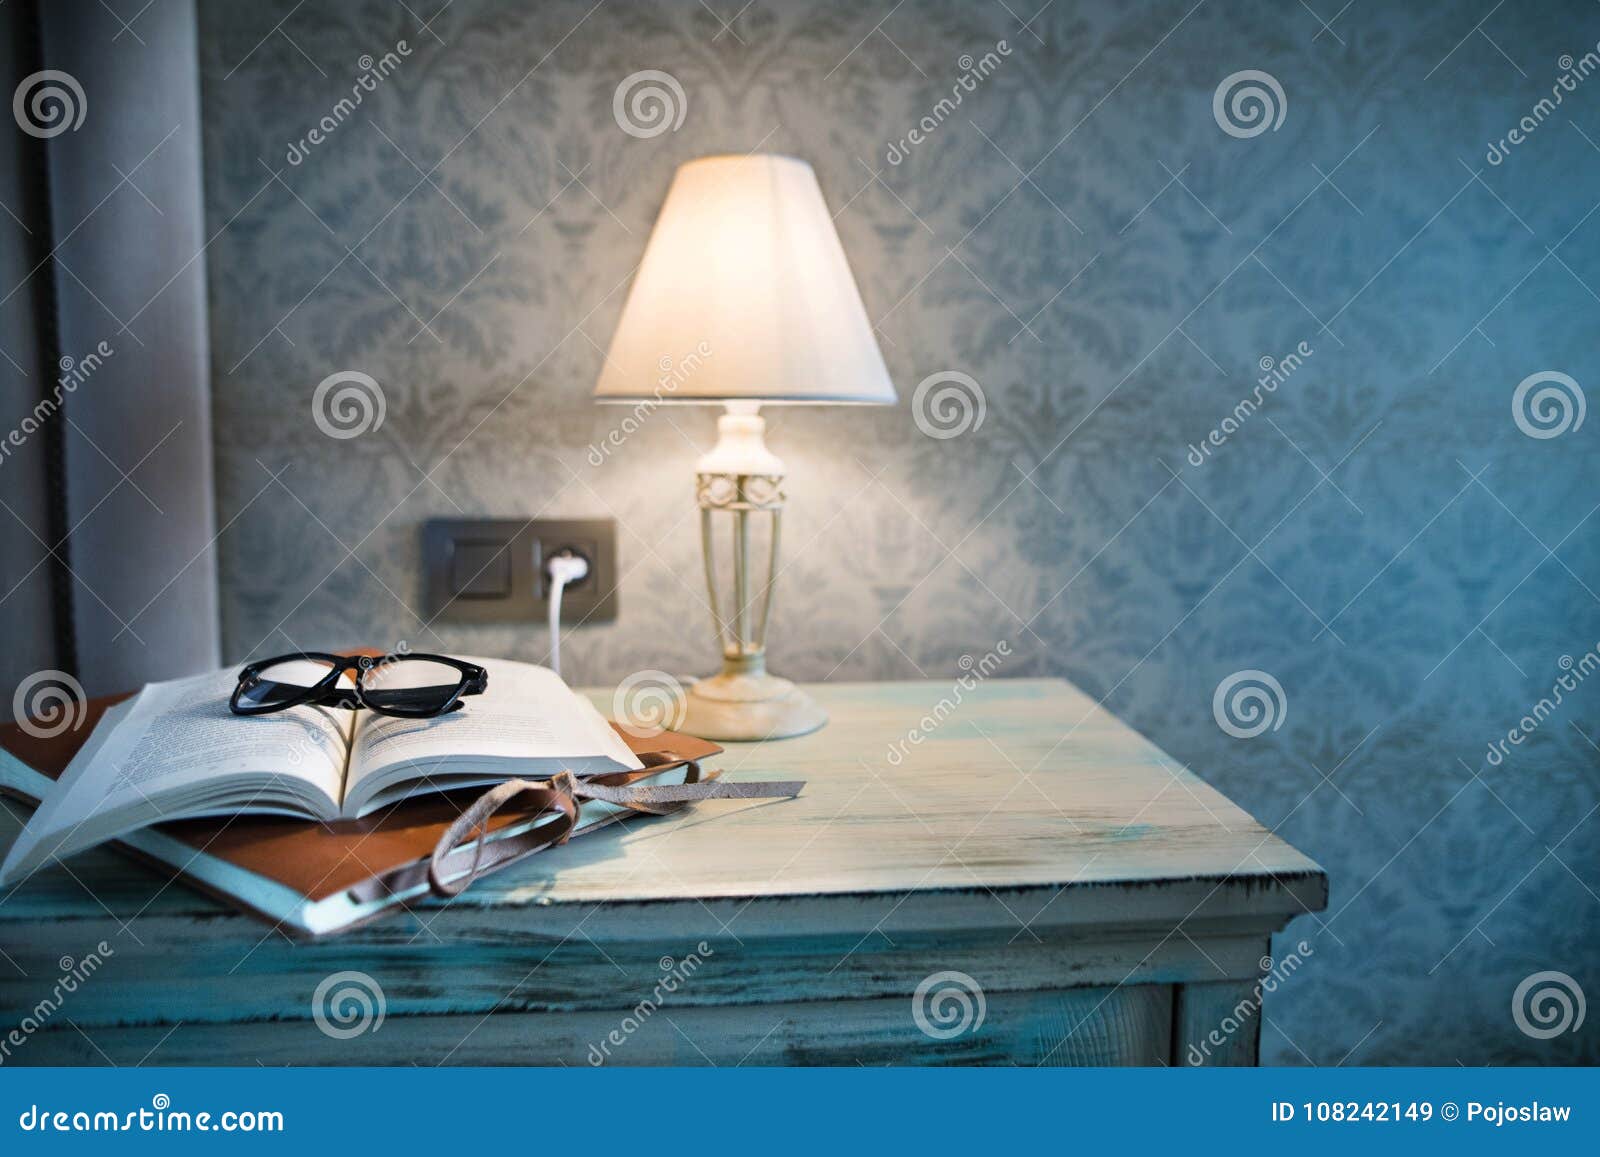 a lamp and a book on a bedside table in a hotel room.